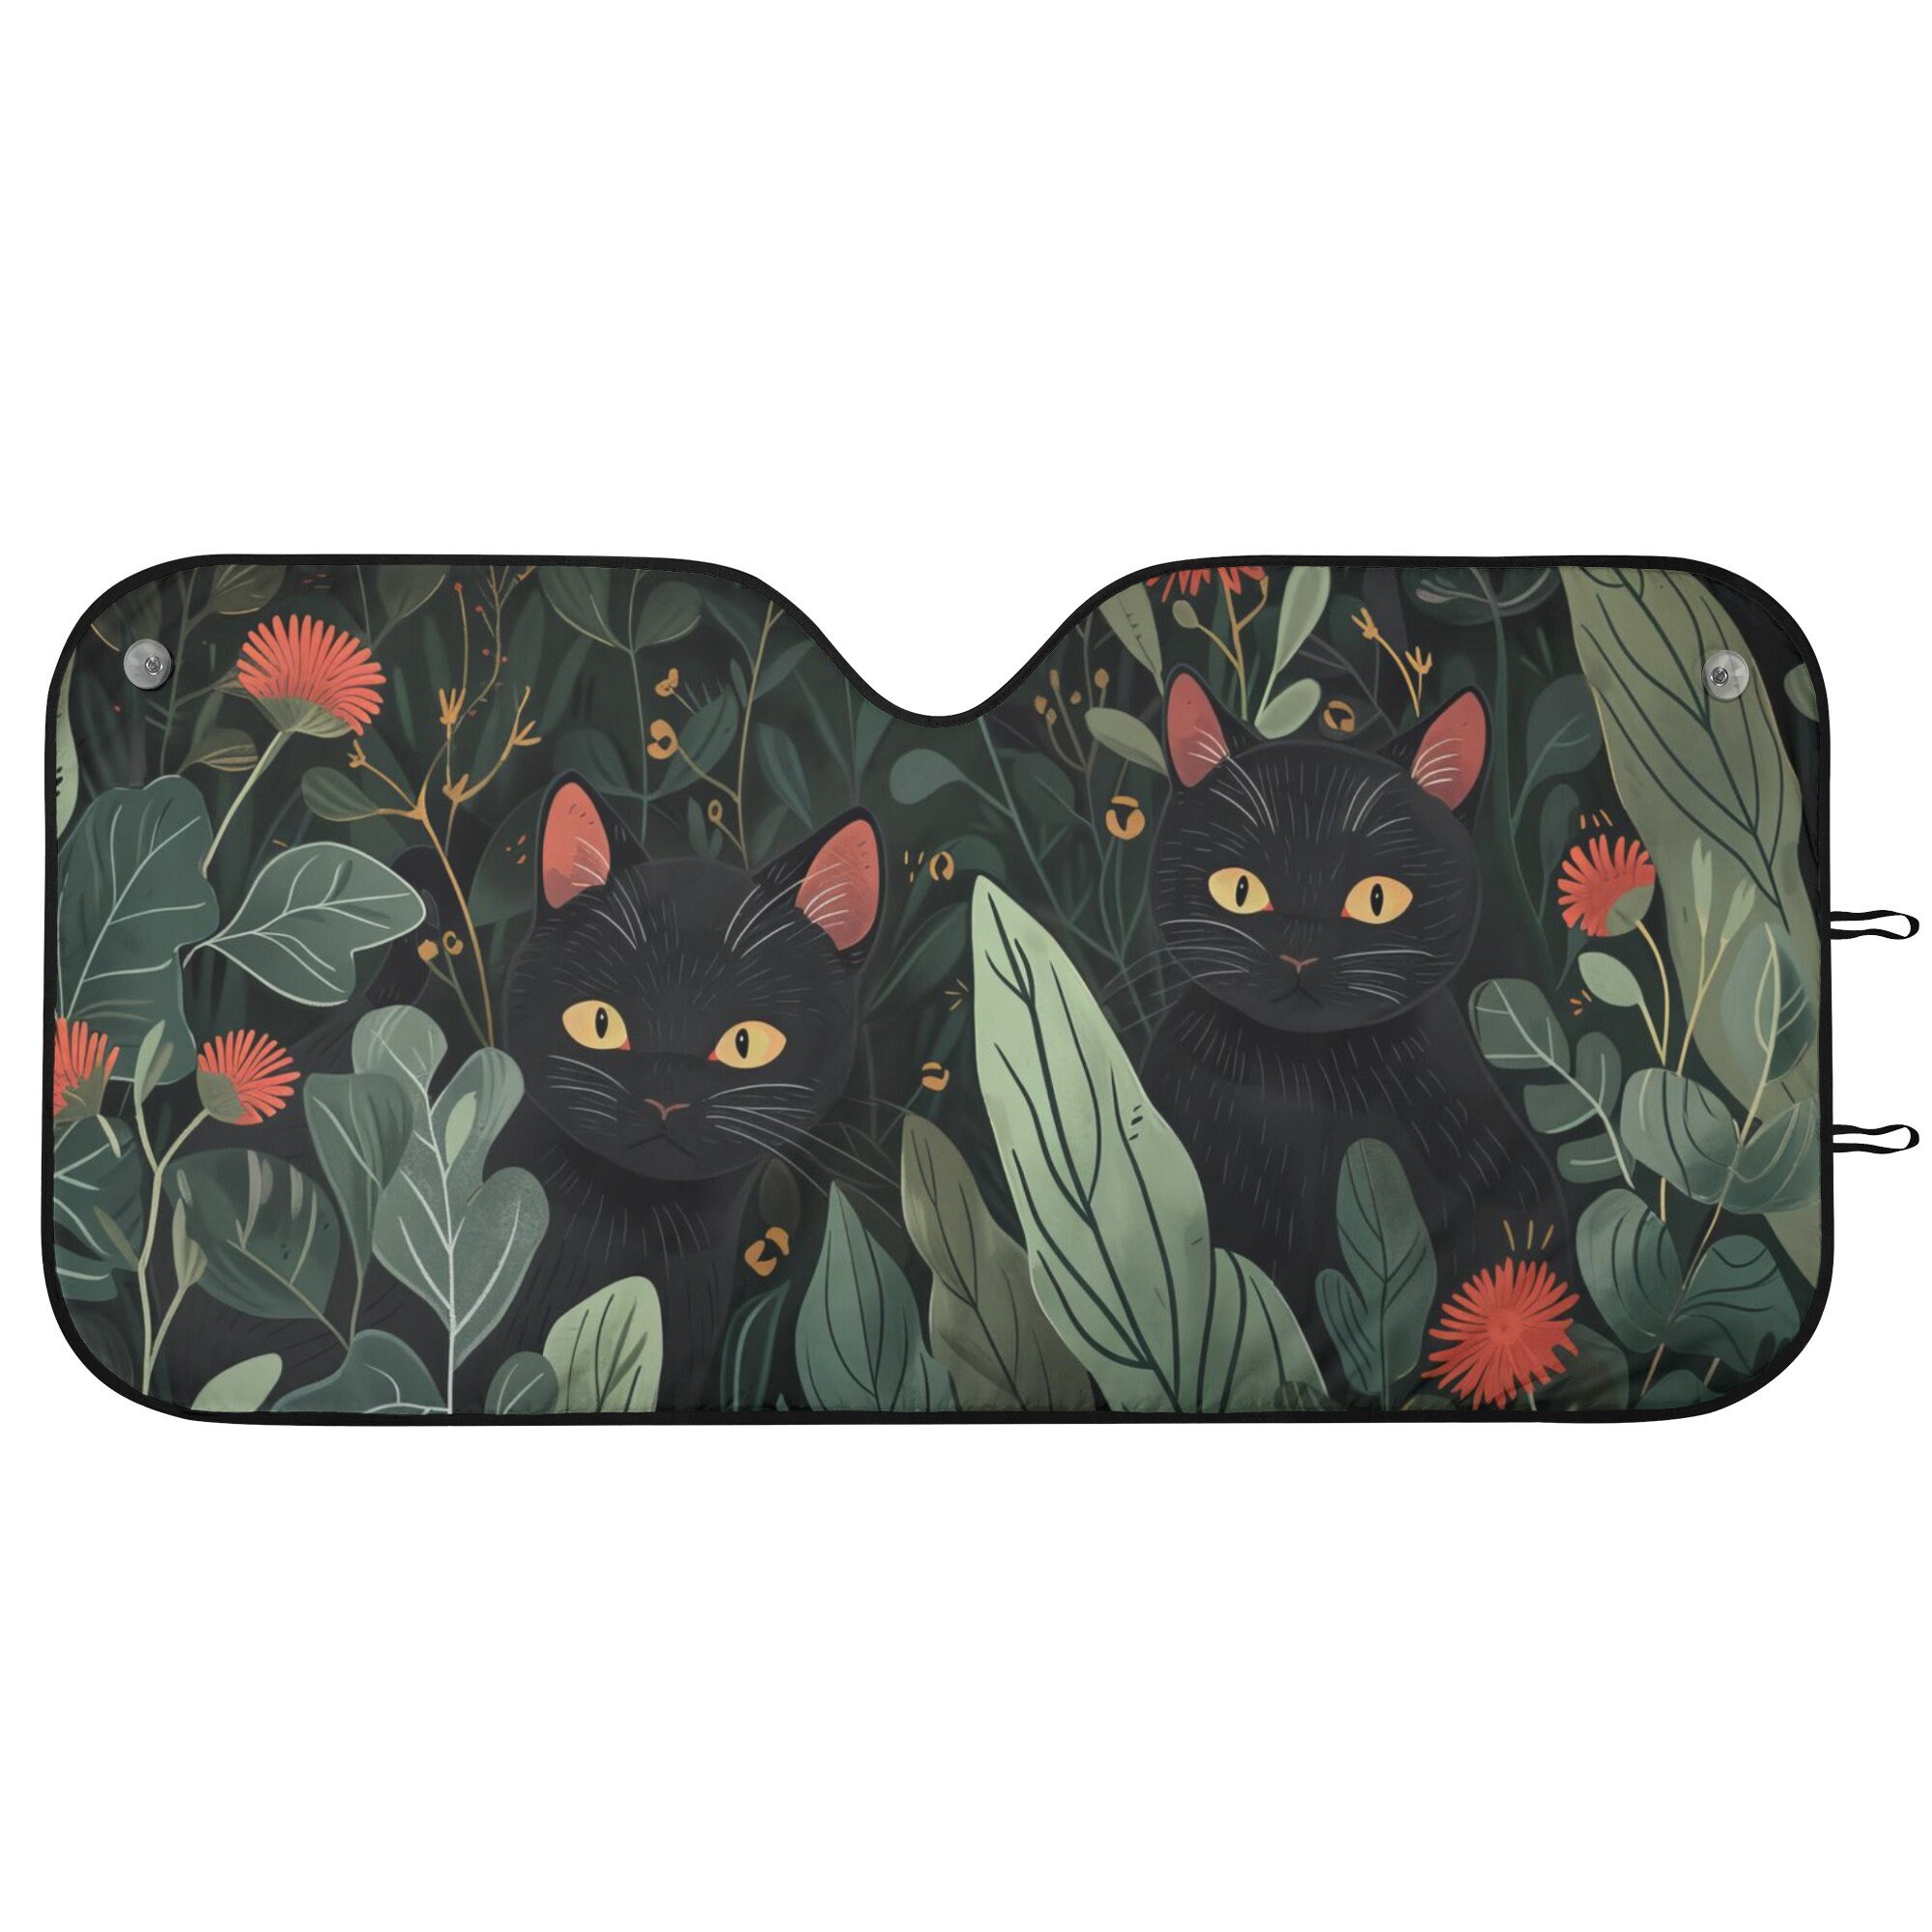 Cats Green Forest Car Auto Sun Shade, Cute Cat Floral Windshield Sunshade, Summer Lovers Car Gift, Car Accessories